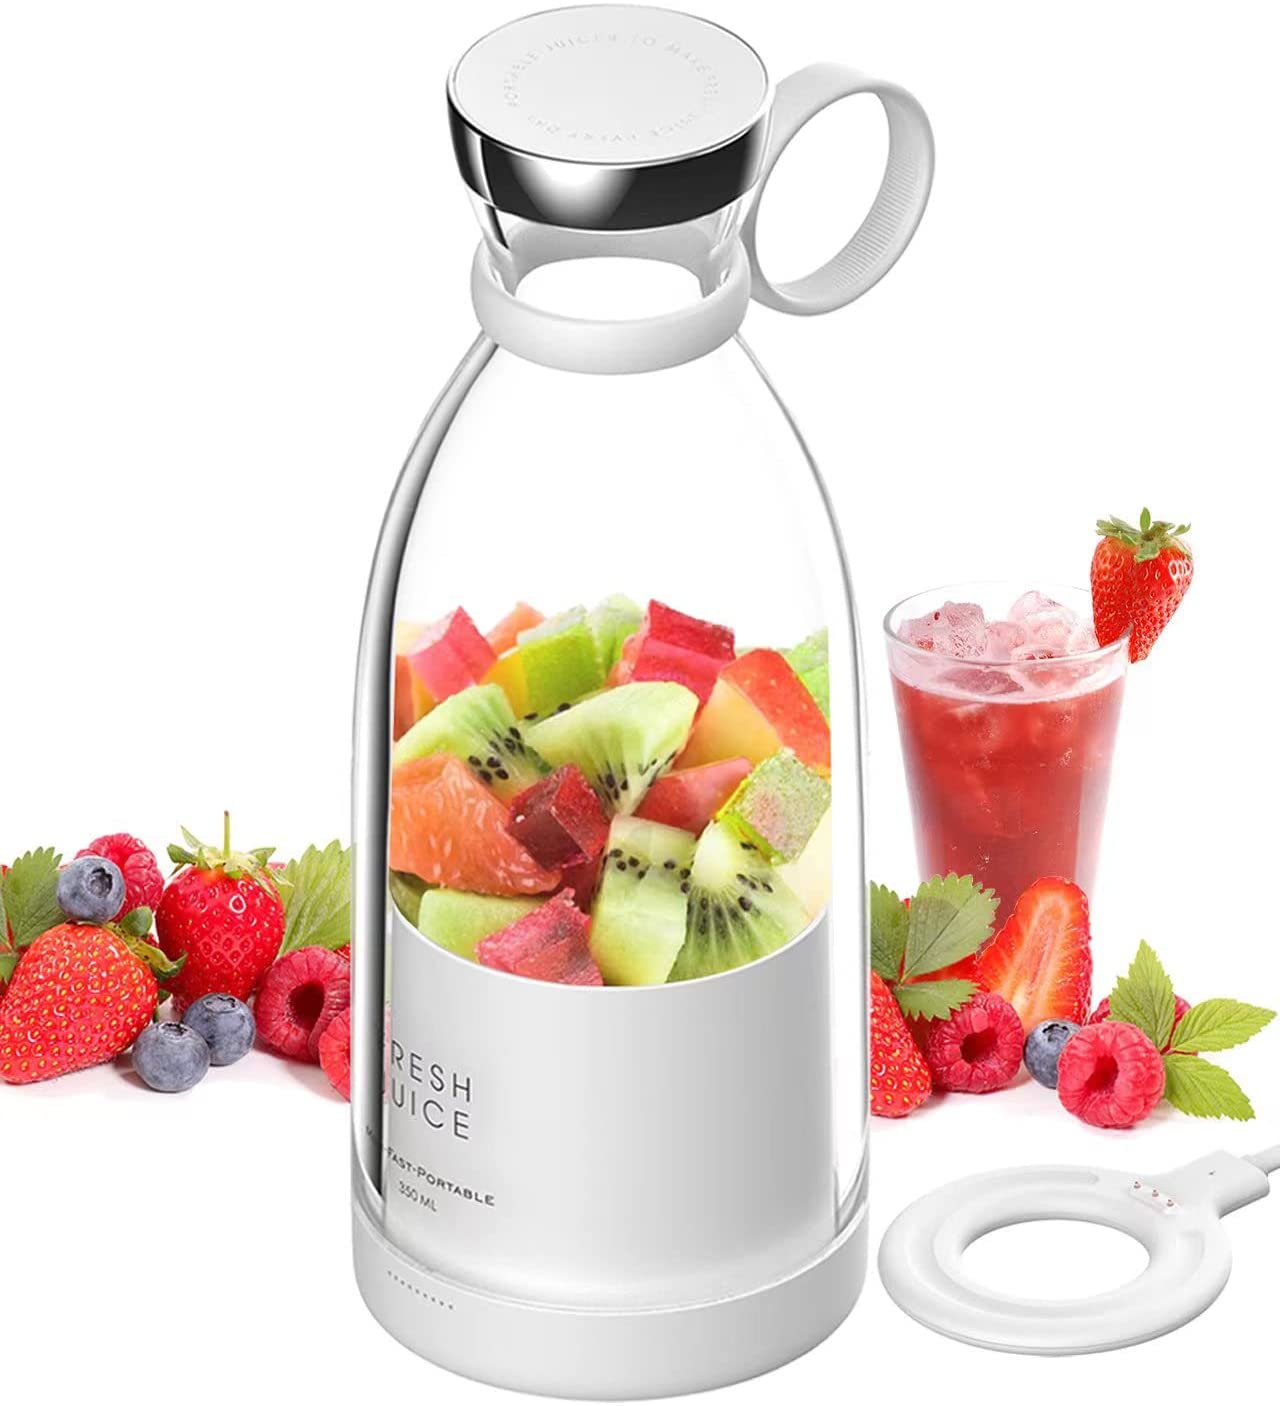 Mini Smoothie Maker Mixeur 350ml Portable Blender Incl Station De Charge A Induction USB Blanc Mini Smoothie Maker Tragbarer Mixer 350ml Portable Blender Inkl USB Induktions Ladestation Weiss 